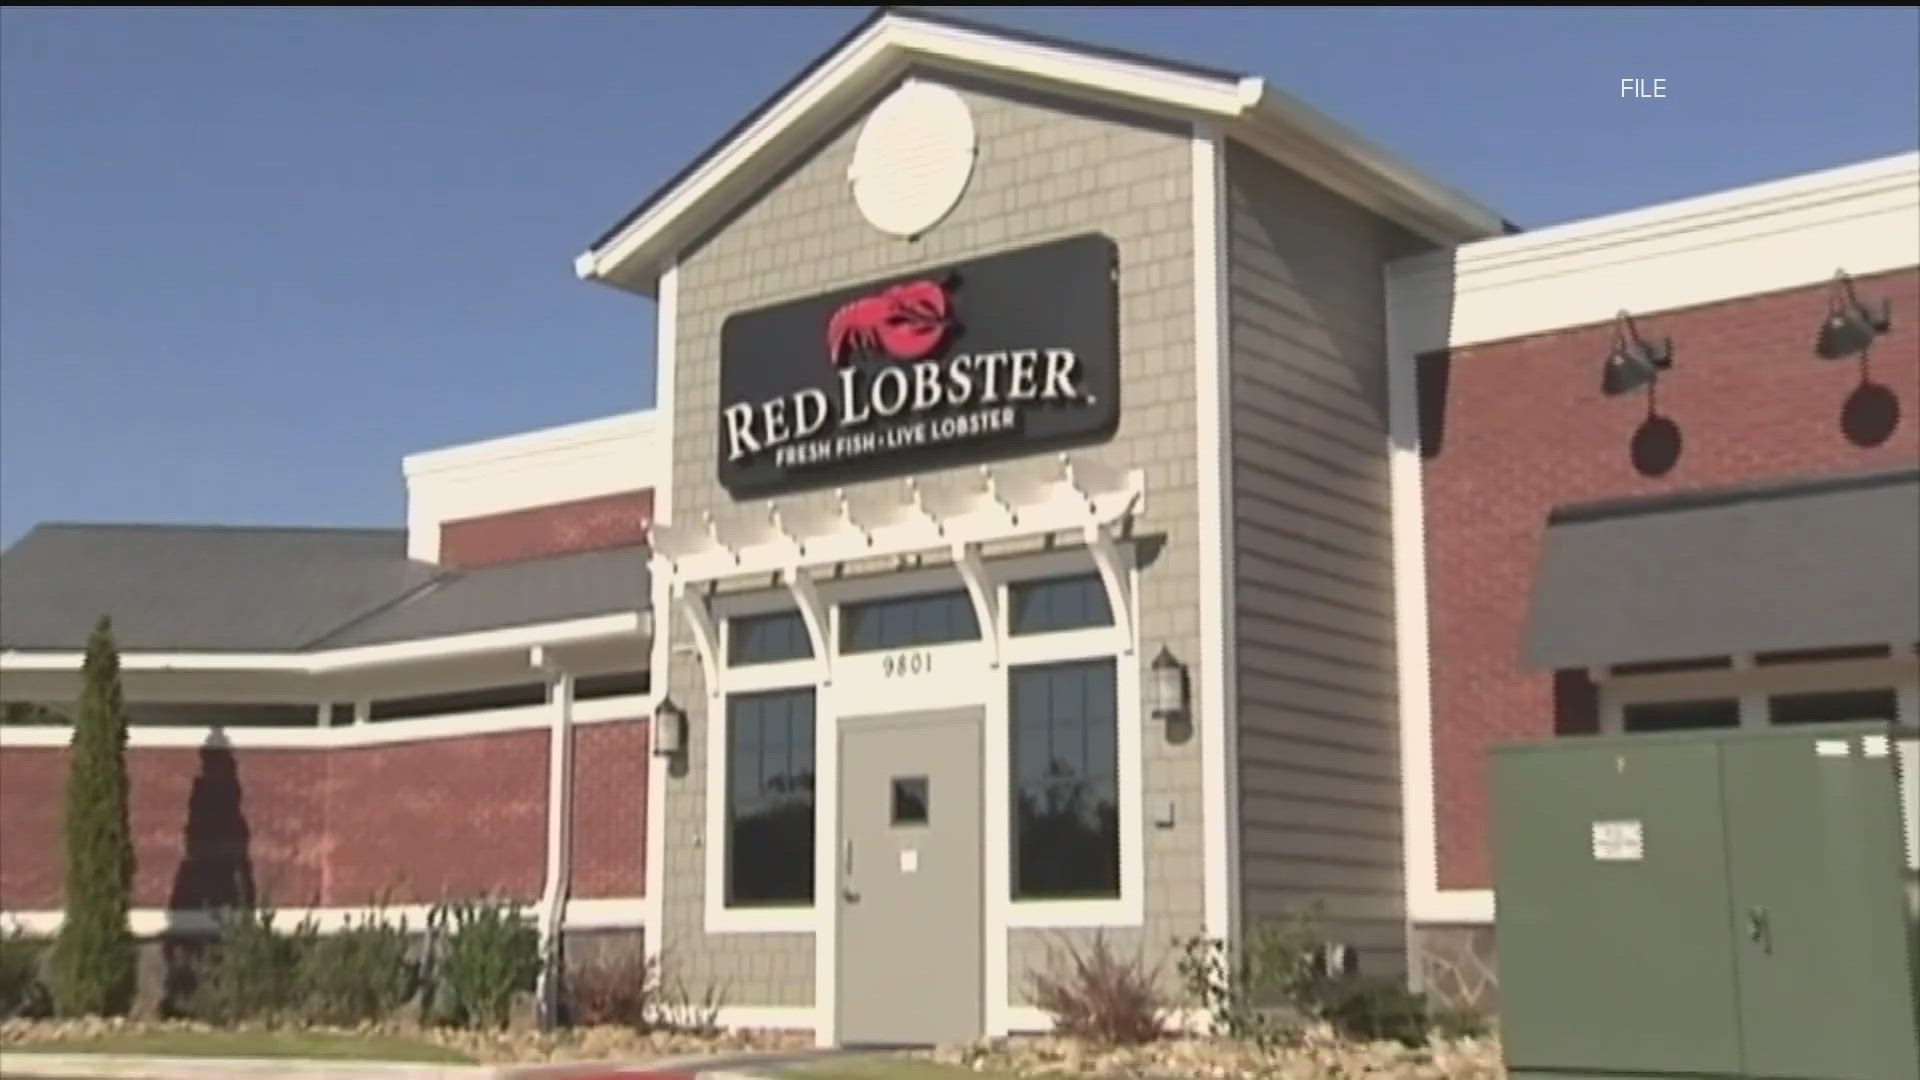 On May 20, it was revealed that three Red Lobster locations would be permanently closing in Georgia. Now, there could be more.